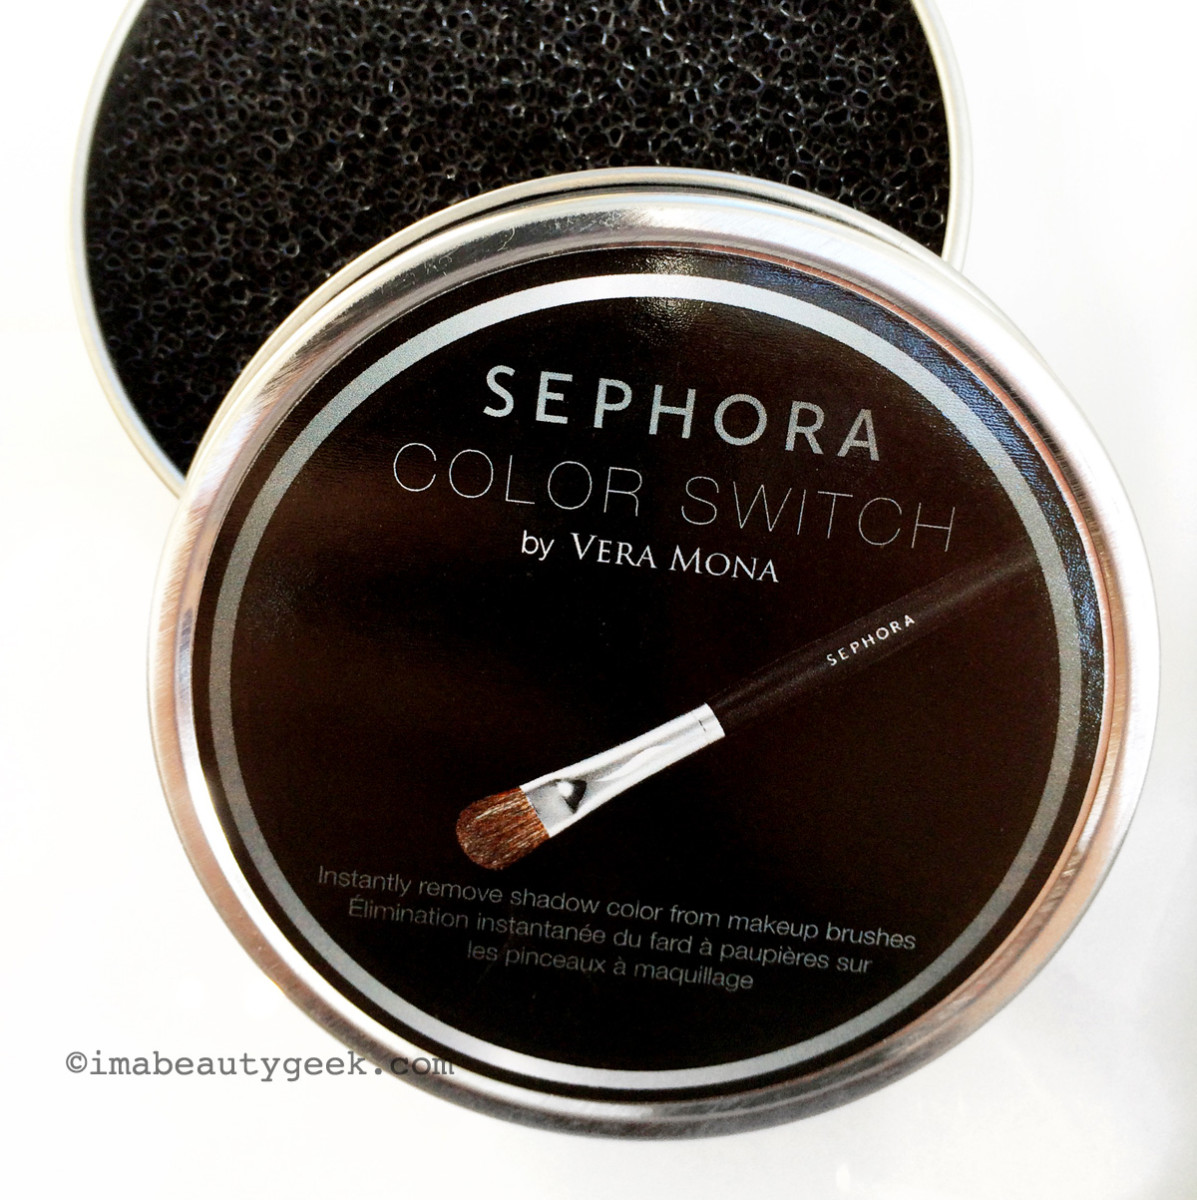 Sephora Color Switch by Vera Mona brush cleaner